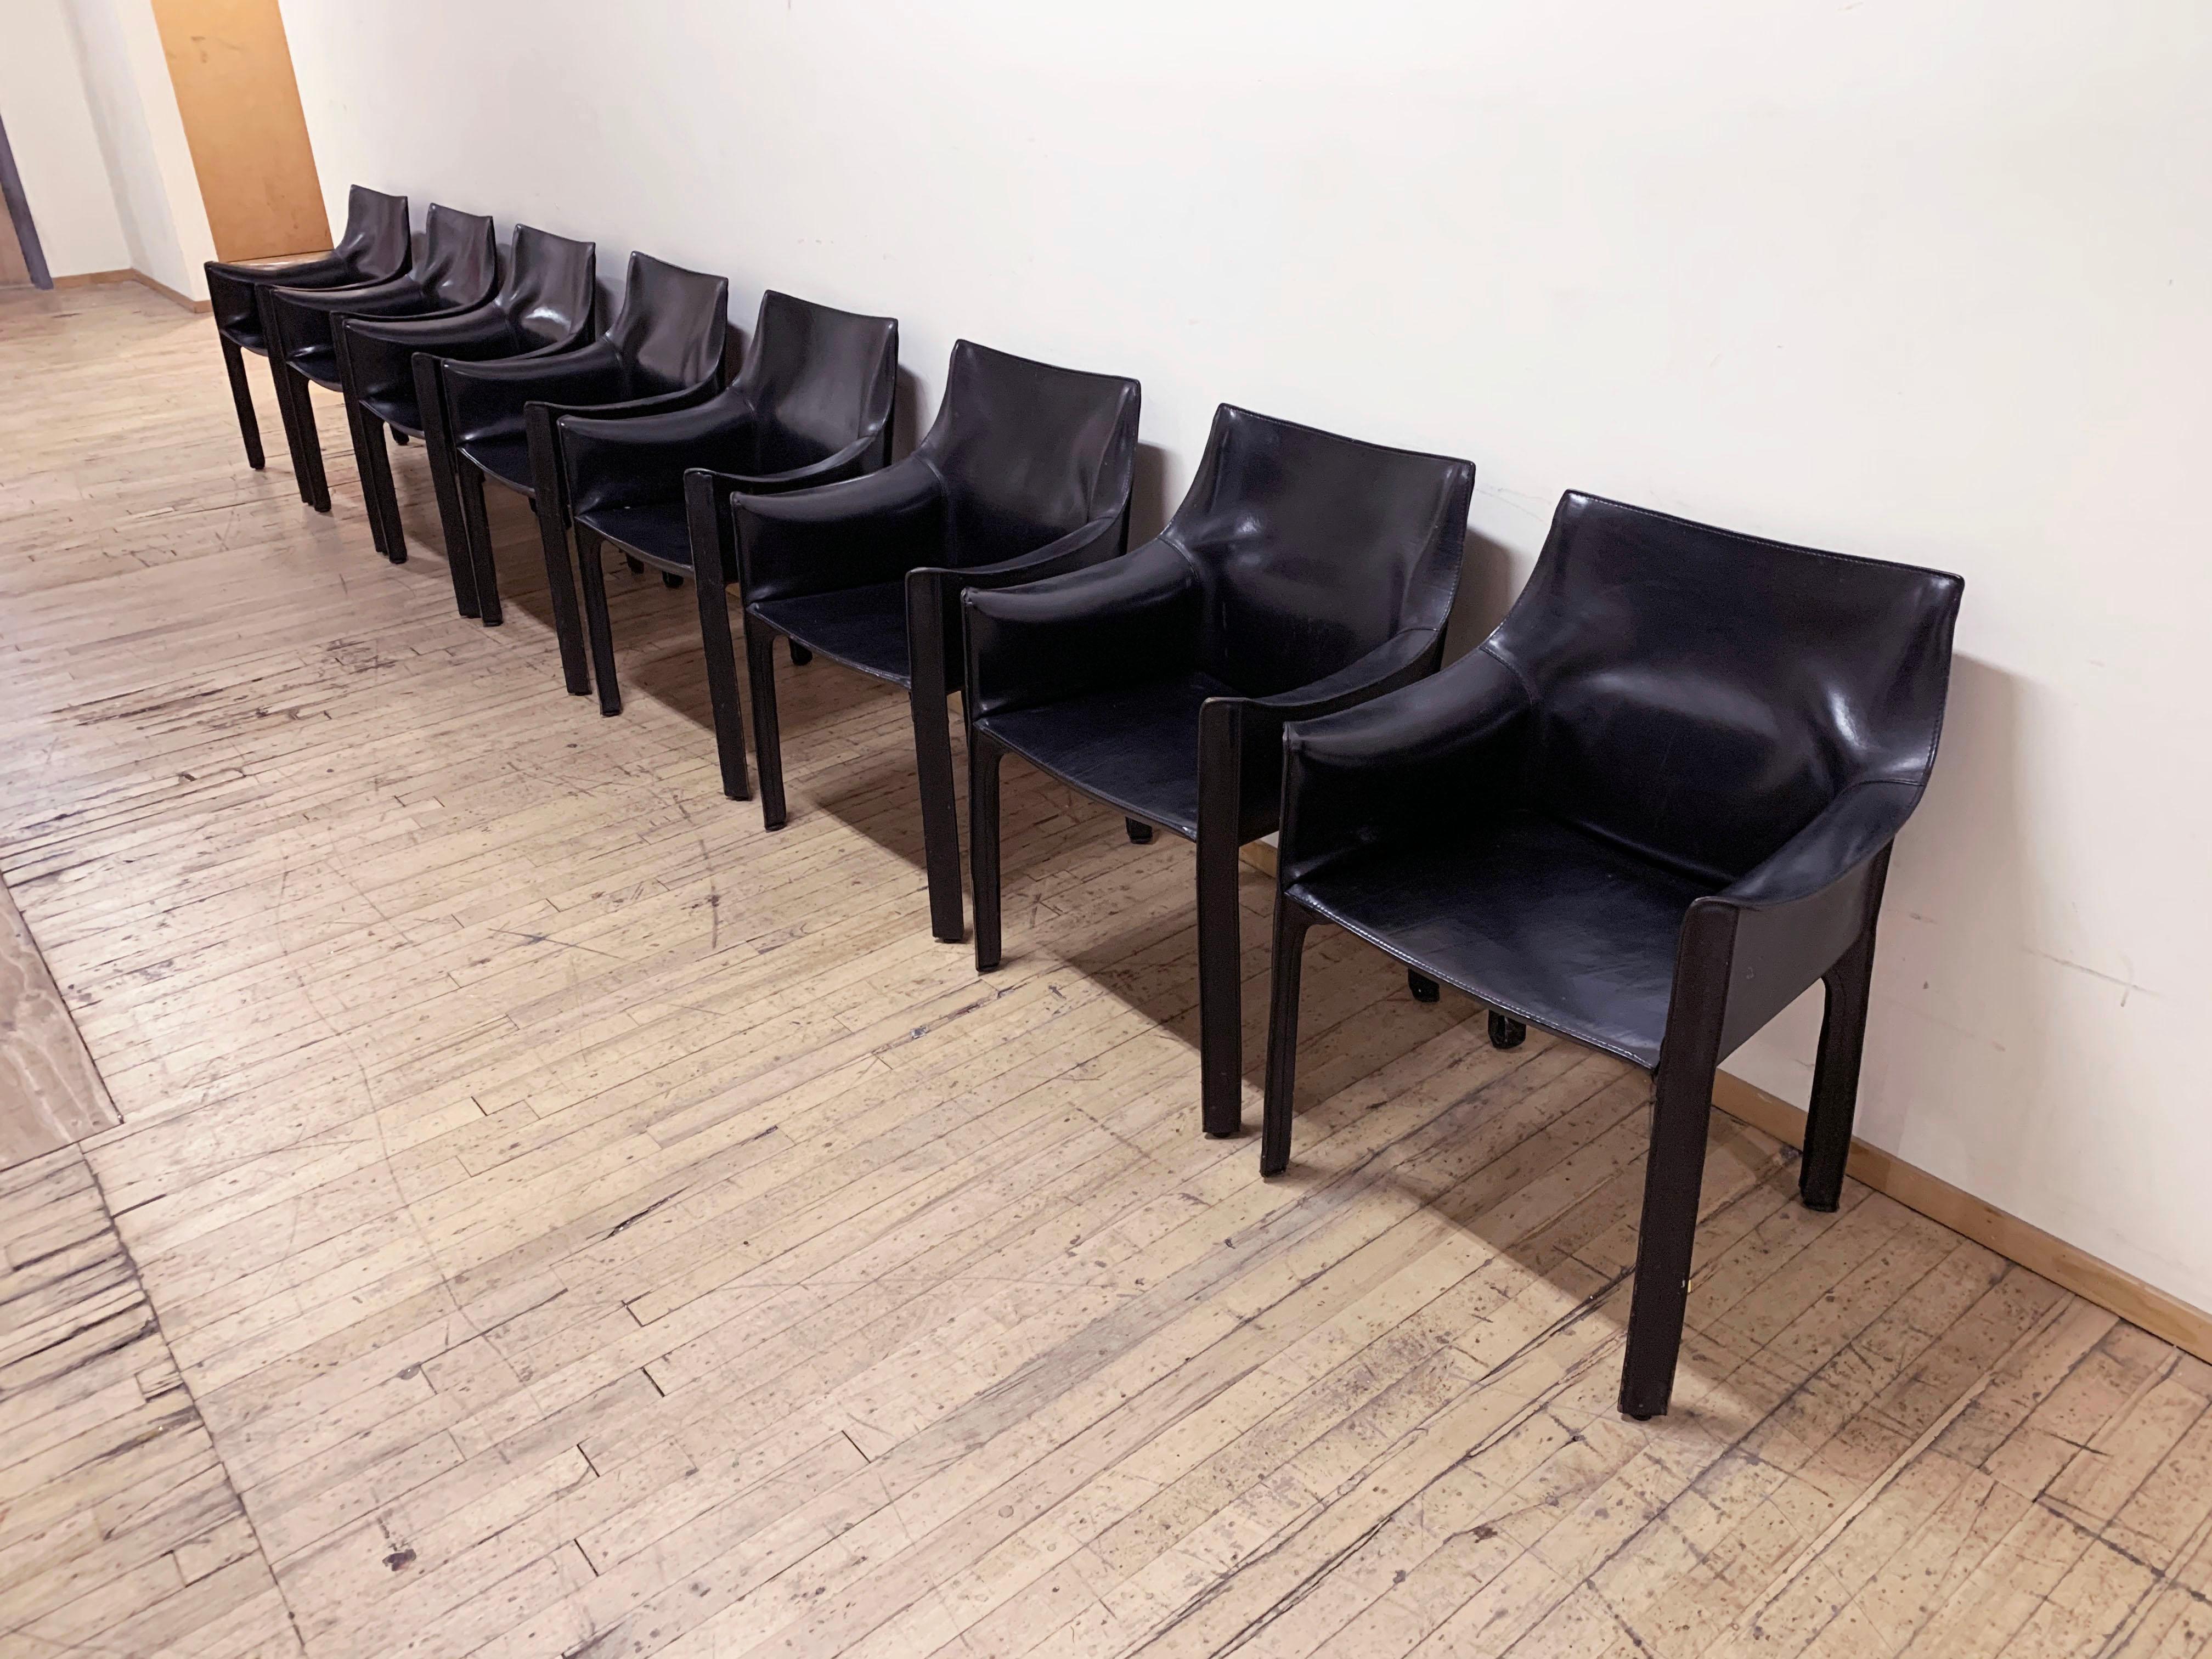 Vintage matched set of 8 Mario Bellini black leather cab armchairs for Cassina.